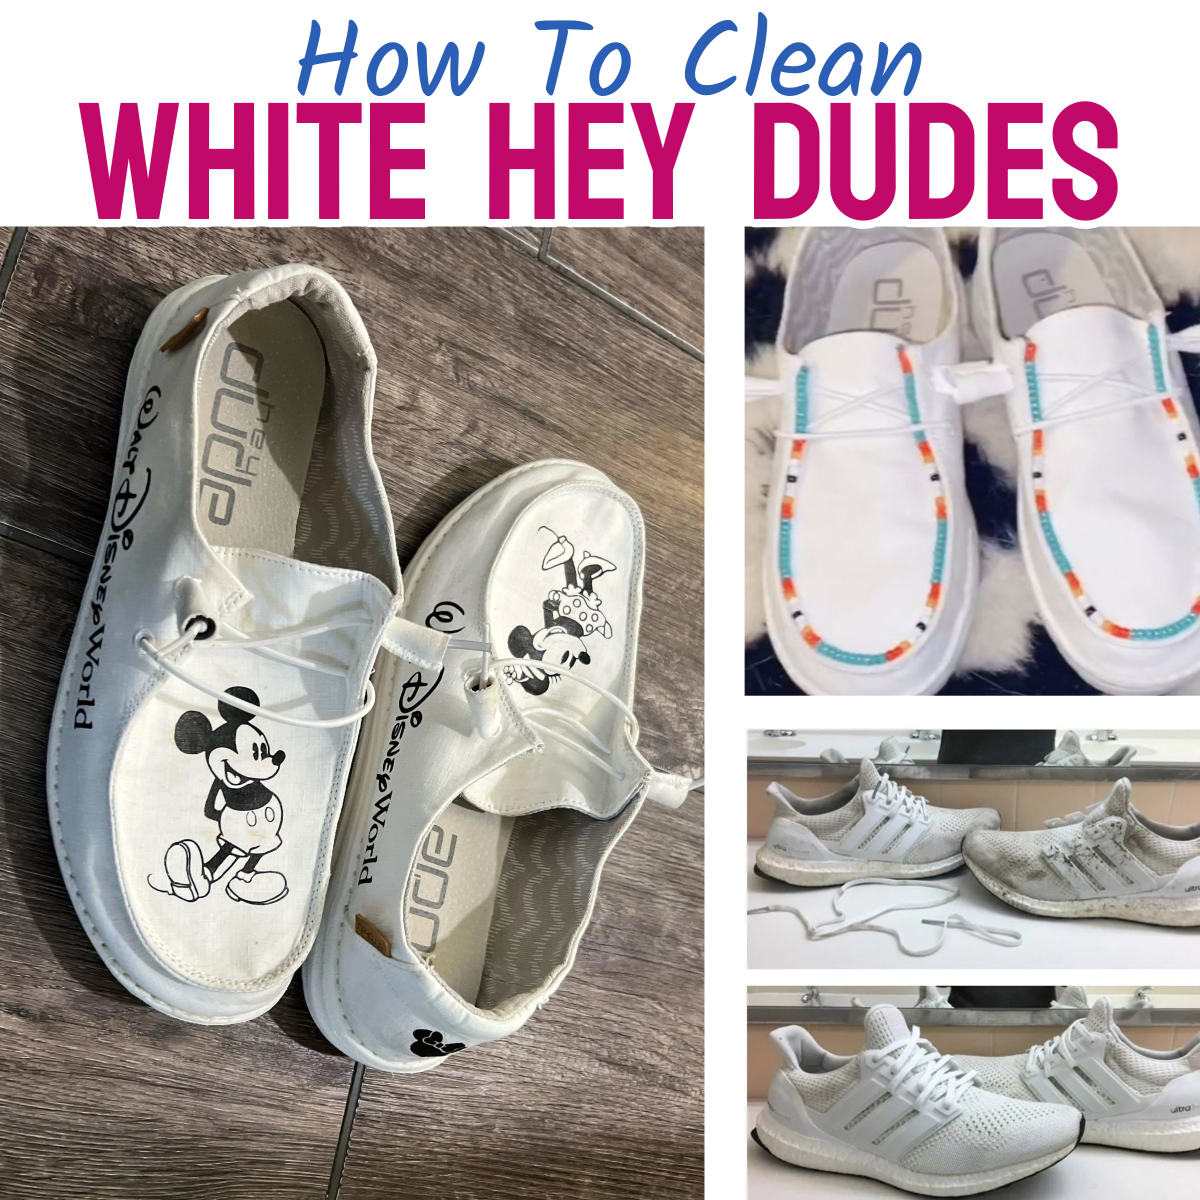 How to clean white Hey Dudes and white canvas shoes - get stains out and make them look brand new again